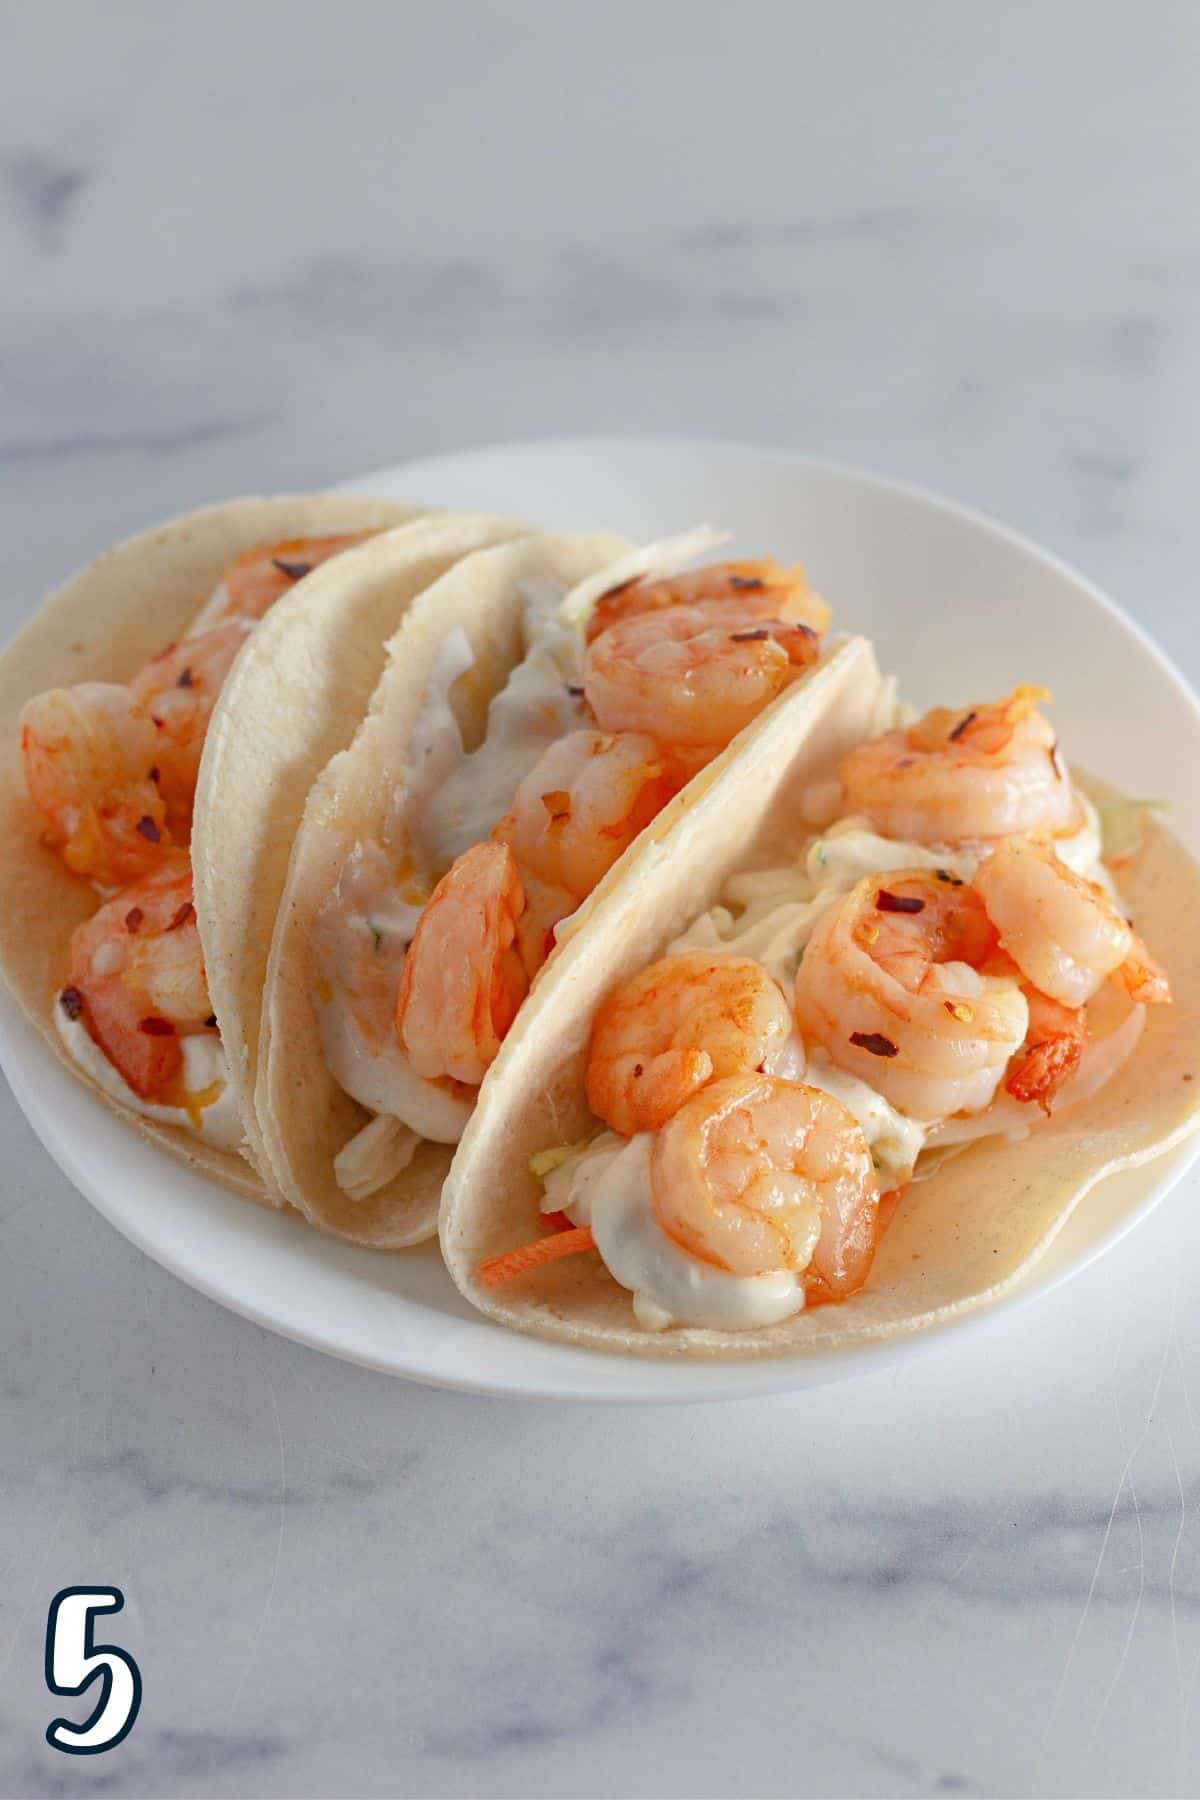 Cooked shrimp laid over a bed of shredded cabbage and cilantro sauce in a taco shell.